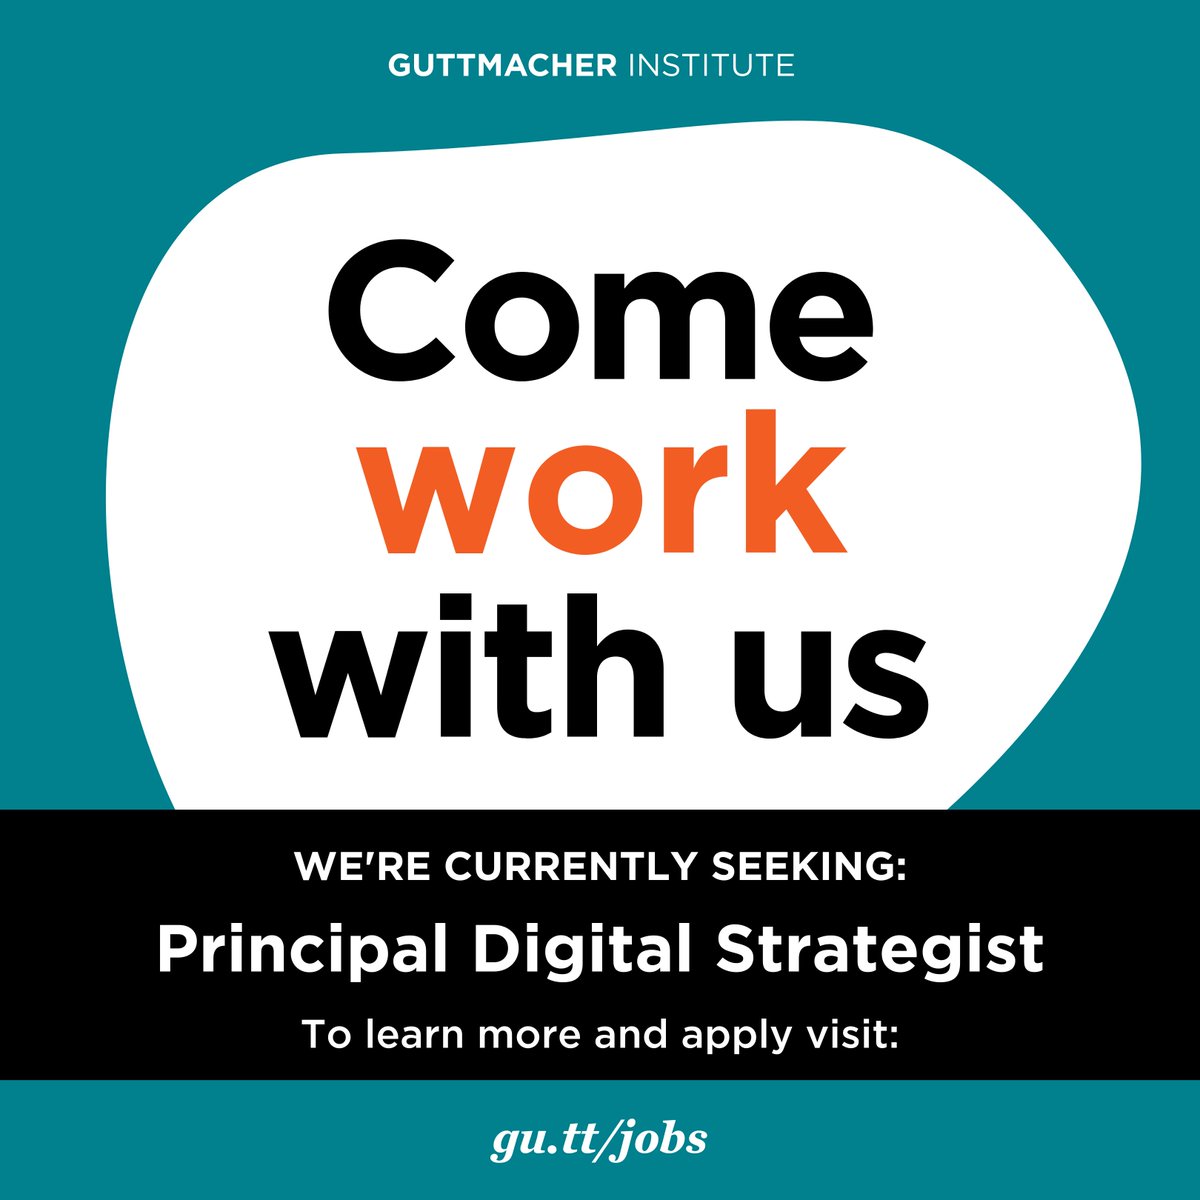 📣 We're hiring! Our NY office is seeking a Principal Digital Strategist who will develop & lead an innovative digital communications strategy to promote the Institute's work via social media, web and email. Learn more & apply today! guttmacher.org/about/job-oppo…